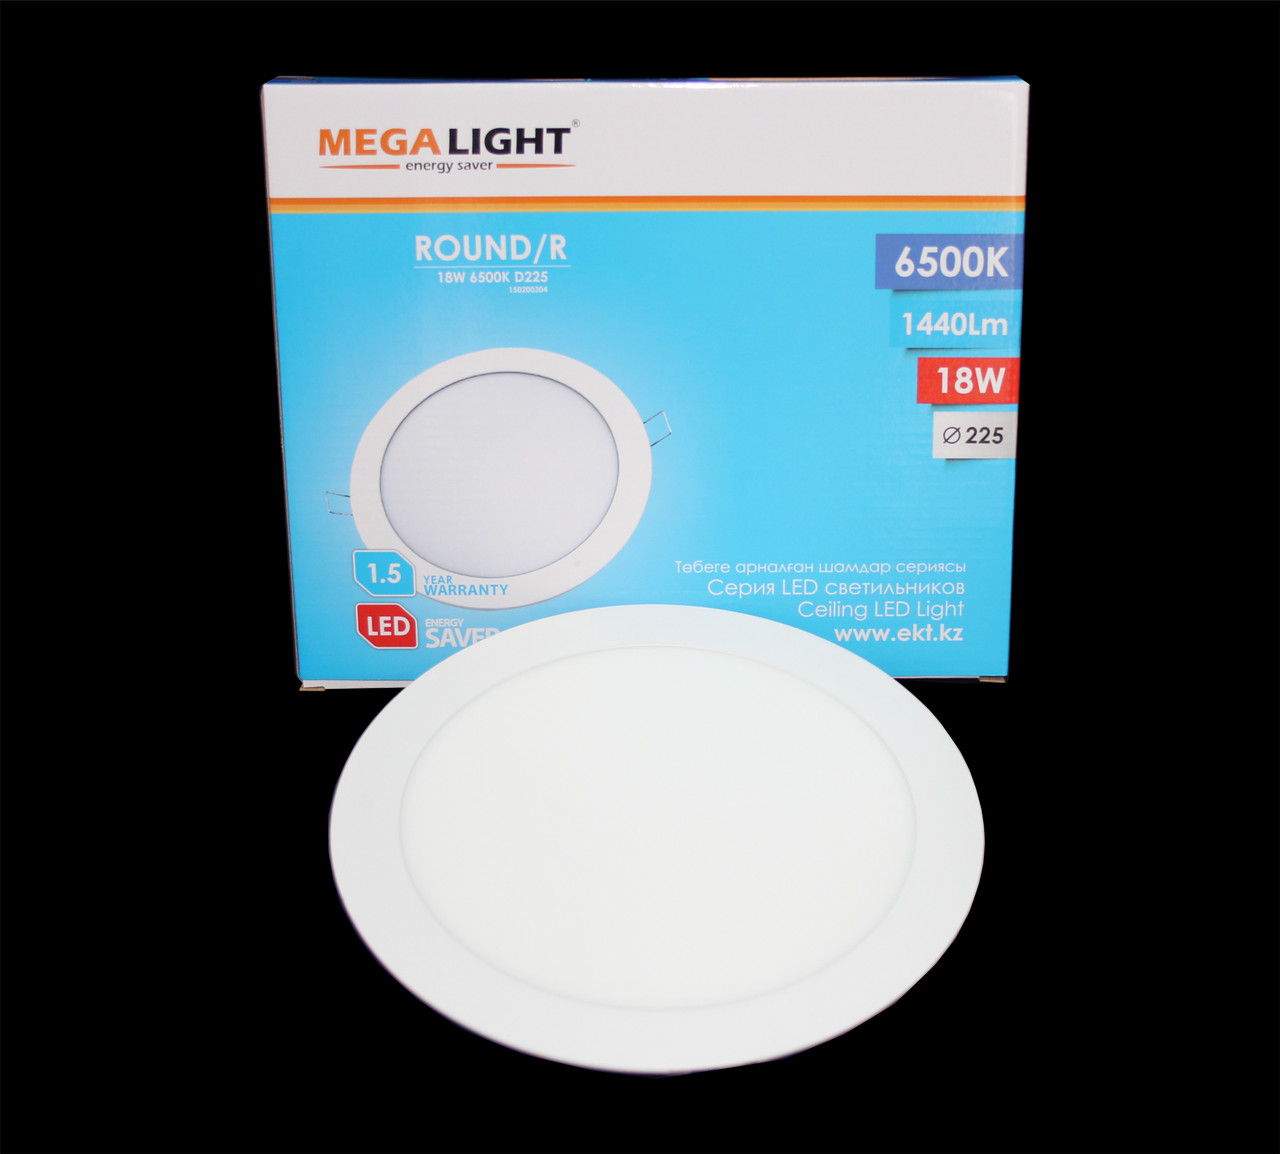 Round r. Светильник le led RL WH 18w d225 6500k. Светильник le led RL WH 18w d225 6500k (20).